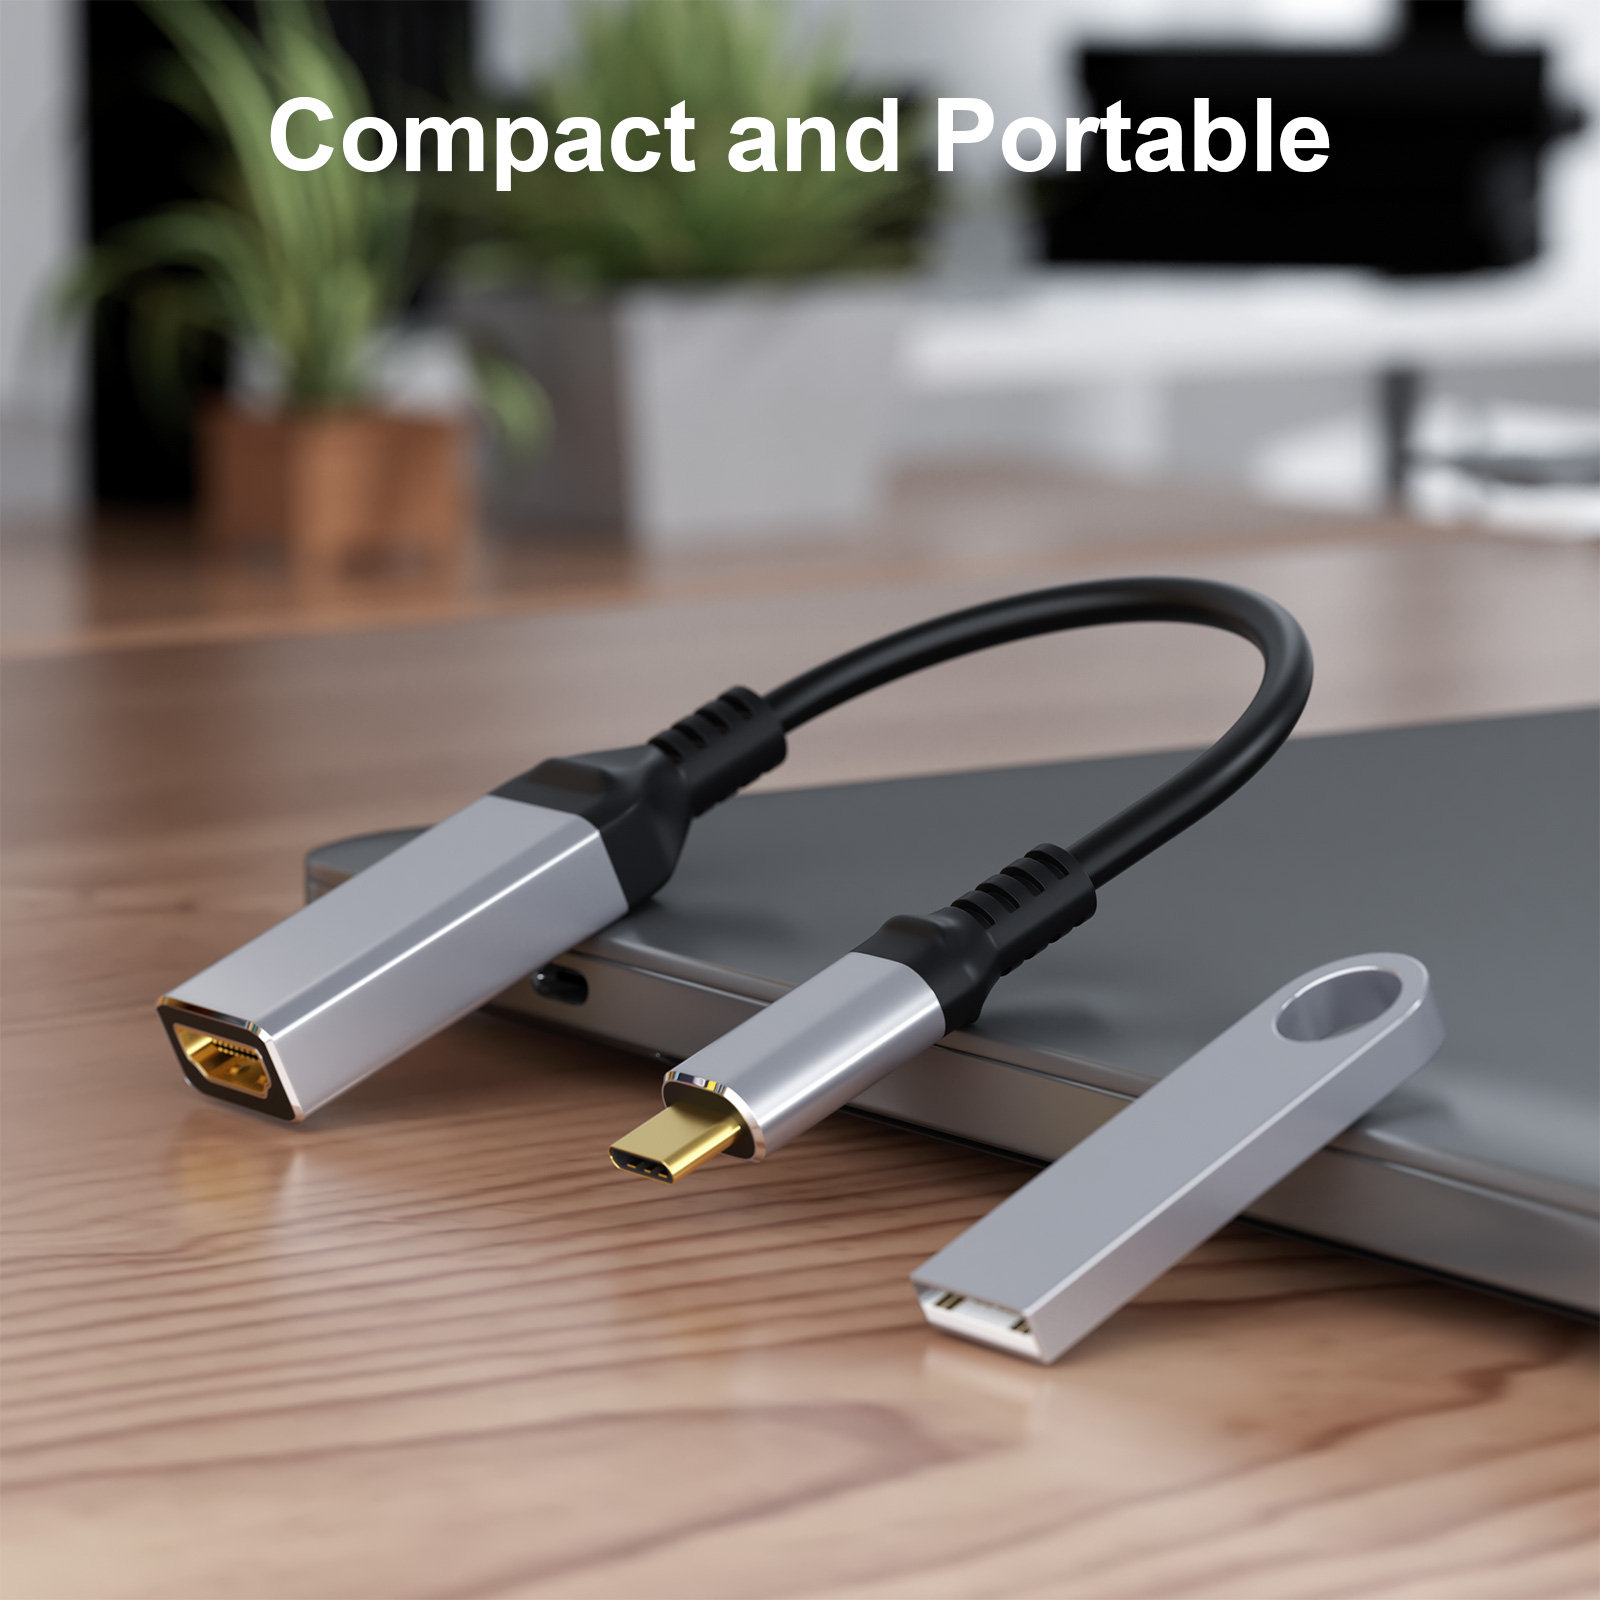 CABLEDECONN USB C USB3.1 to HDMI 8K 2.1 Cable 1.8m 7680x4320 8K@30Hz 4K@120Hz UHD HDR High Speed 48Gbps Thunderbolt 3 Compatible for HDTVs Projectors and Monitors  F0208